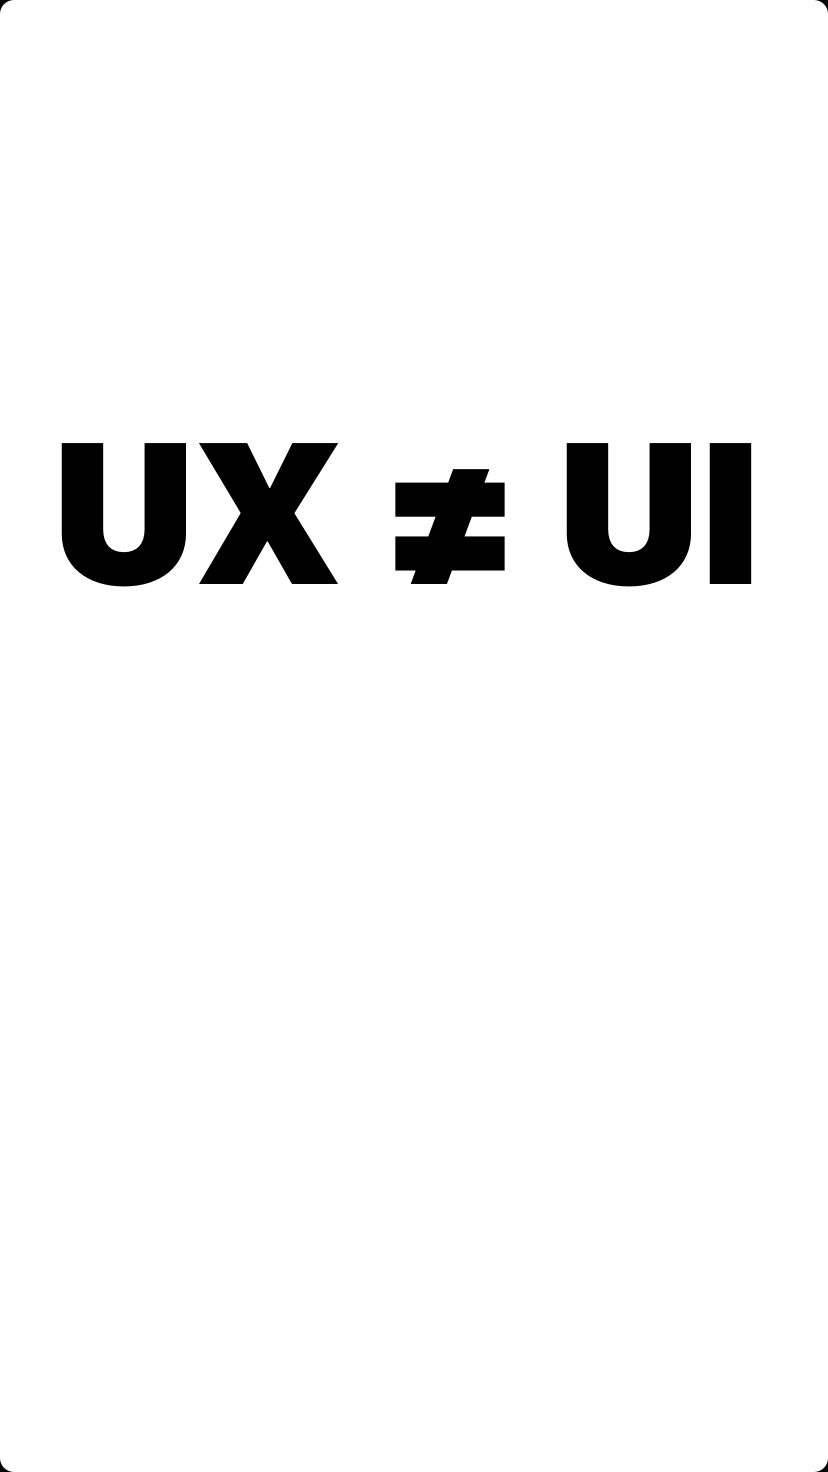 UX is not the same as UI.